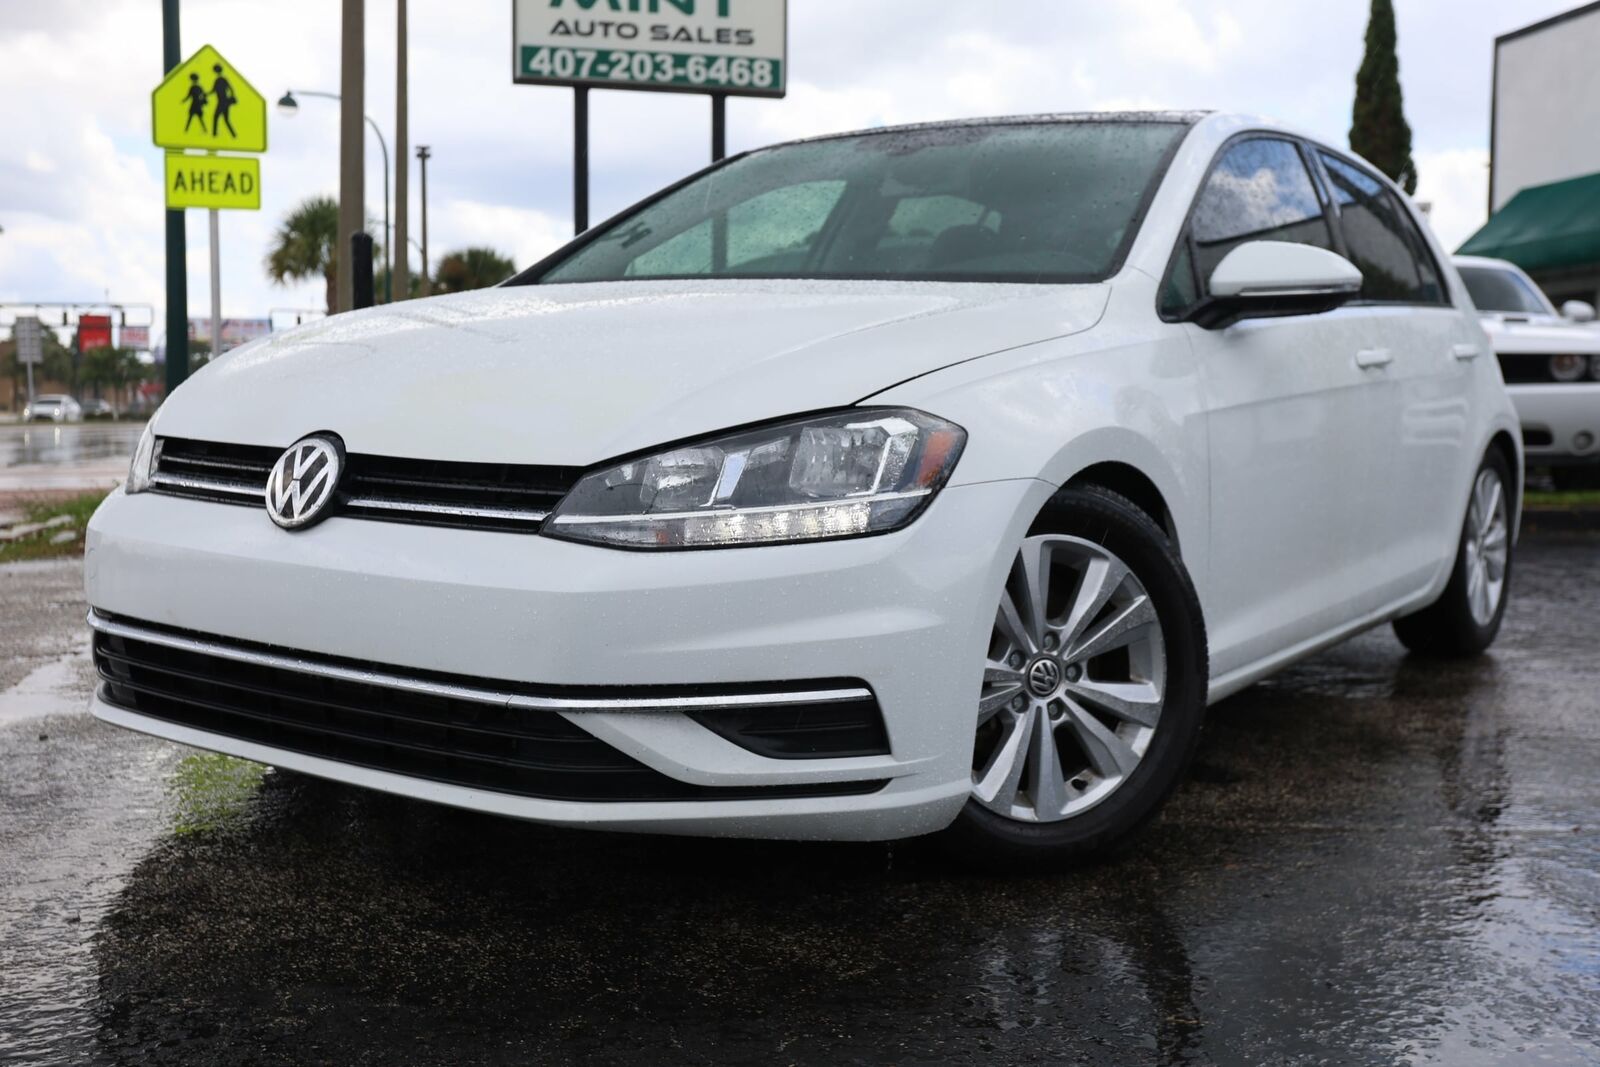 2020 Volkswagen Golf 1.4t Tsi 2020 Volkswagen Golf, White With 18729 Miles Available Now!